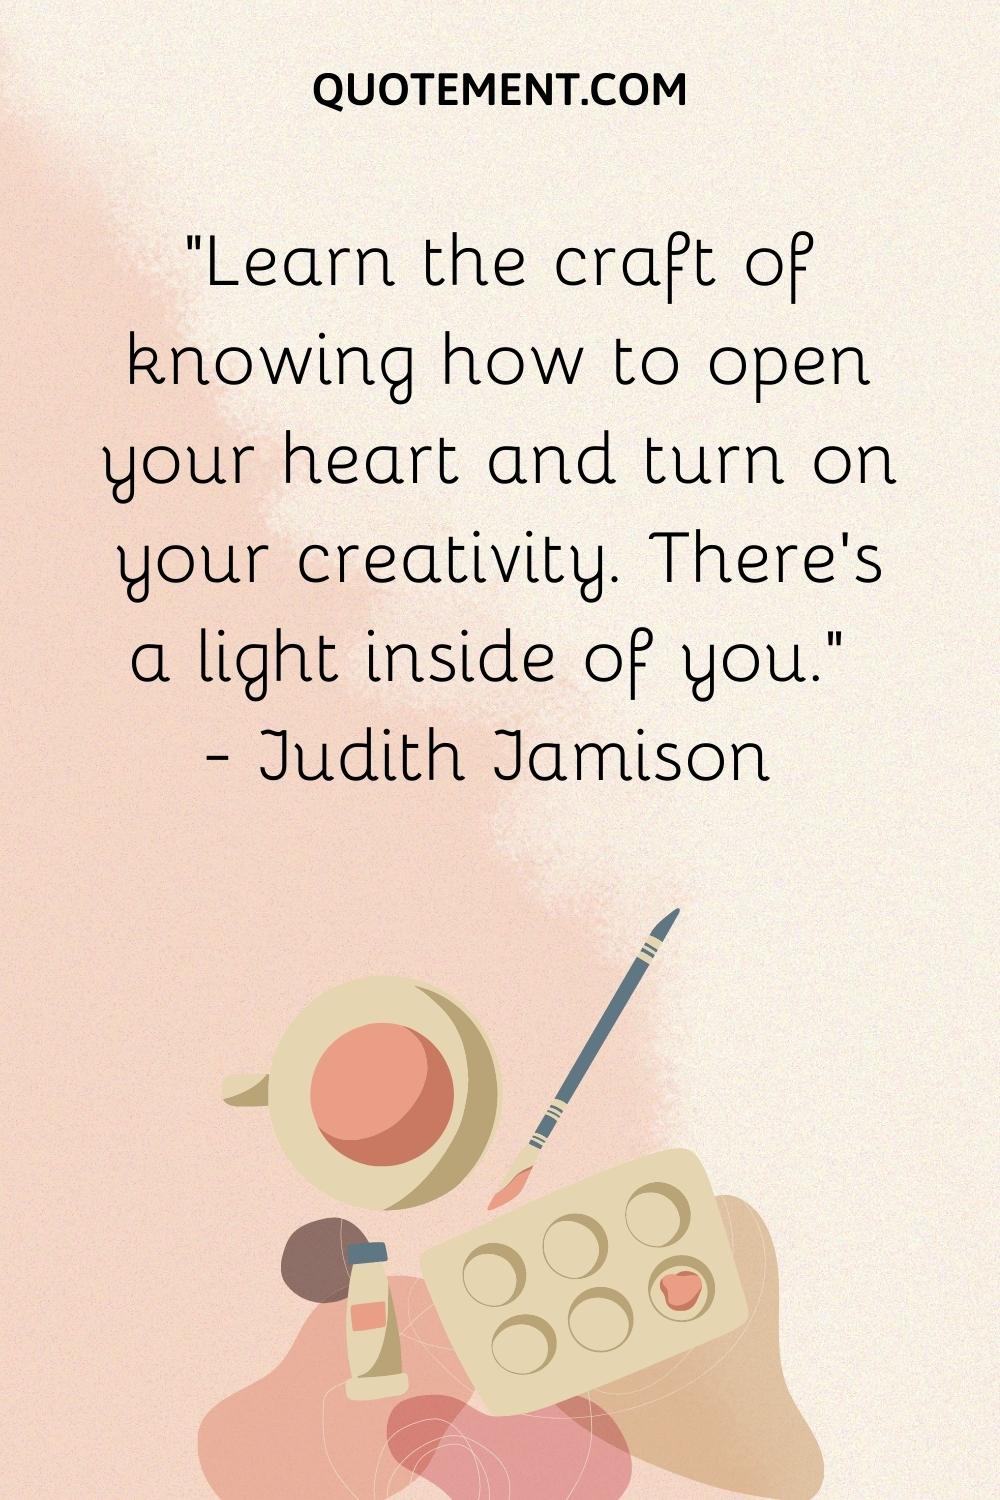 Learn the craft of knowing how to open your heart and turn on your creativity